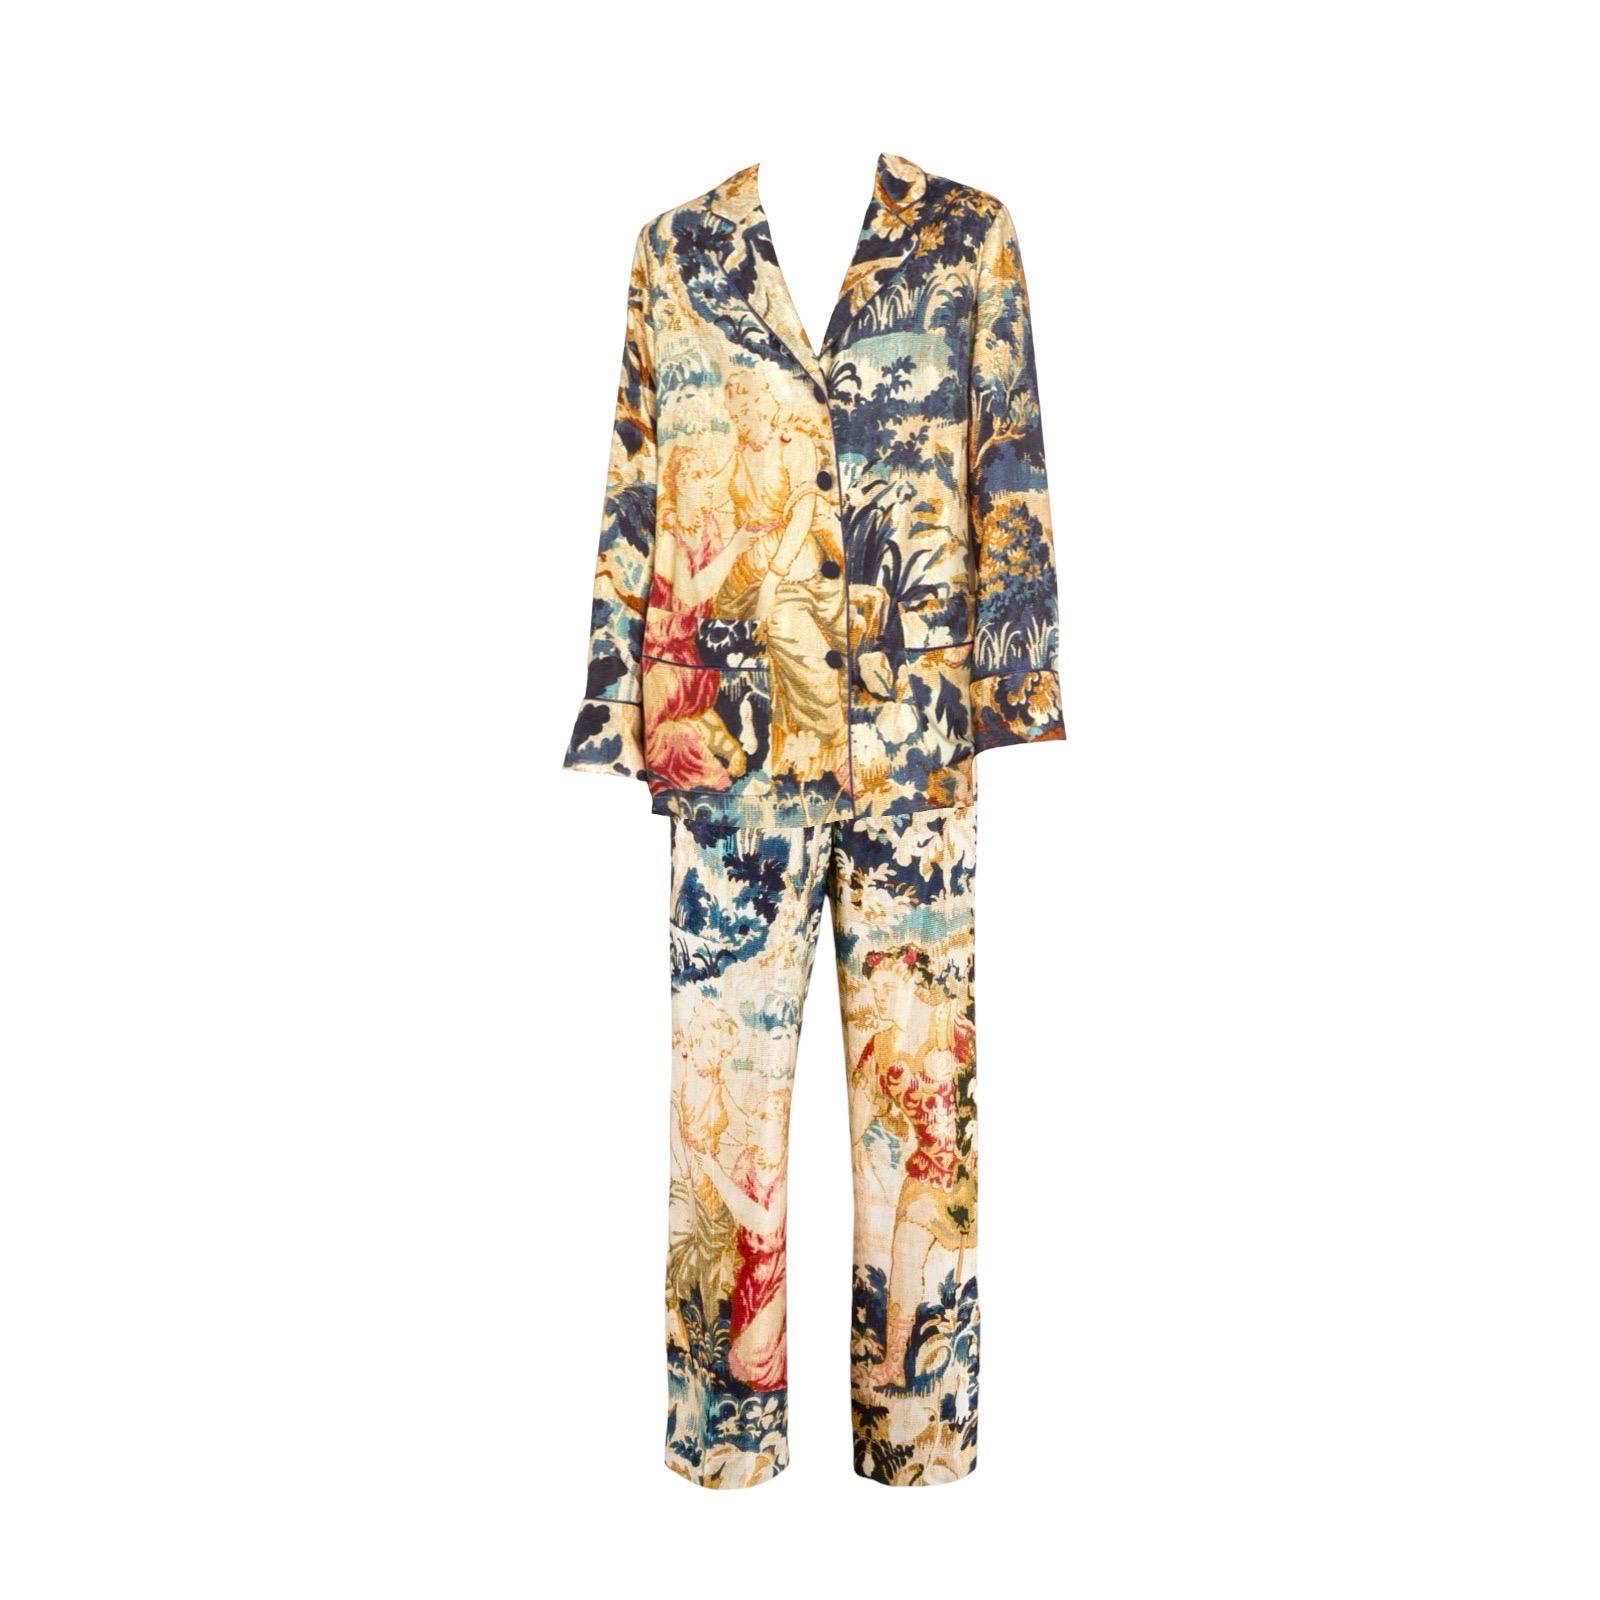 NEW F.R.S For Restless Sleepers FRS Gobelin Print Suit M For Sale 8